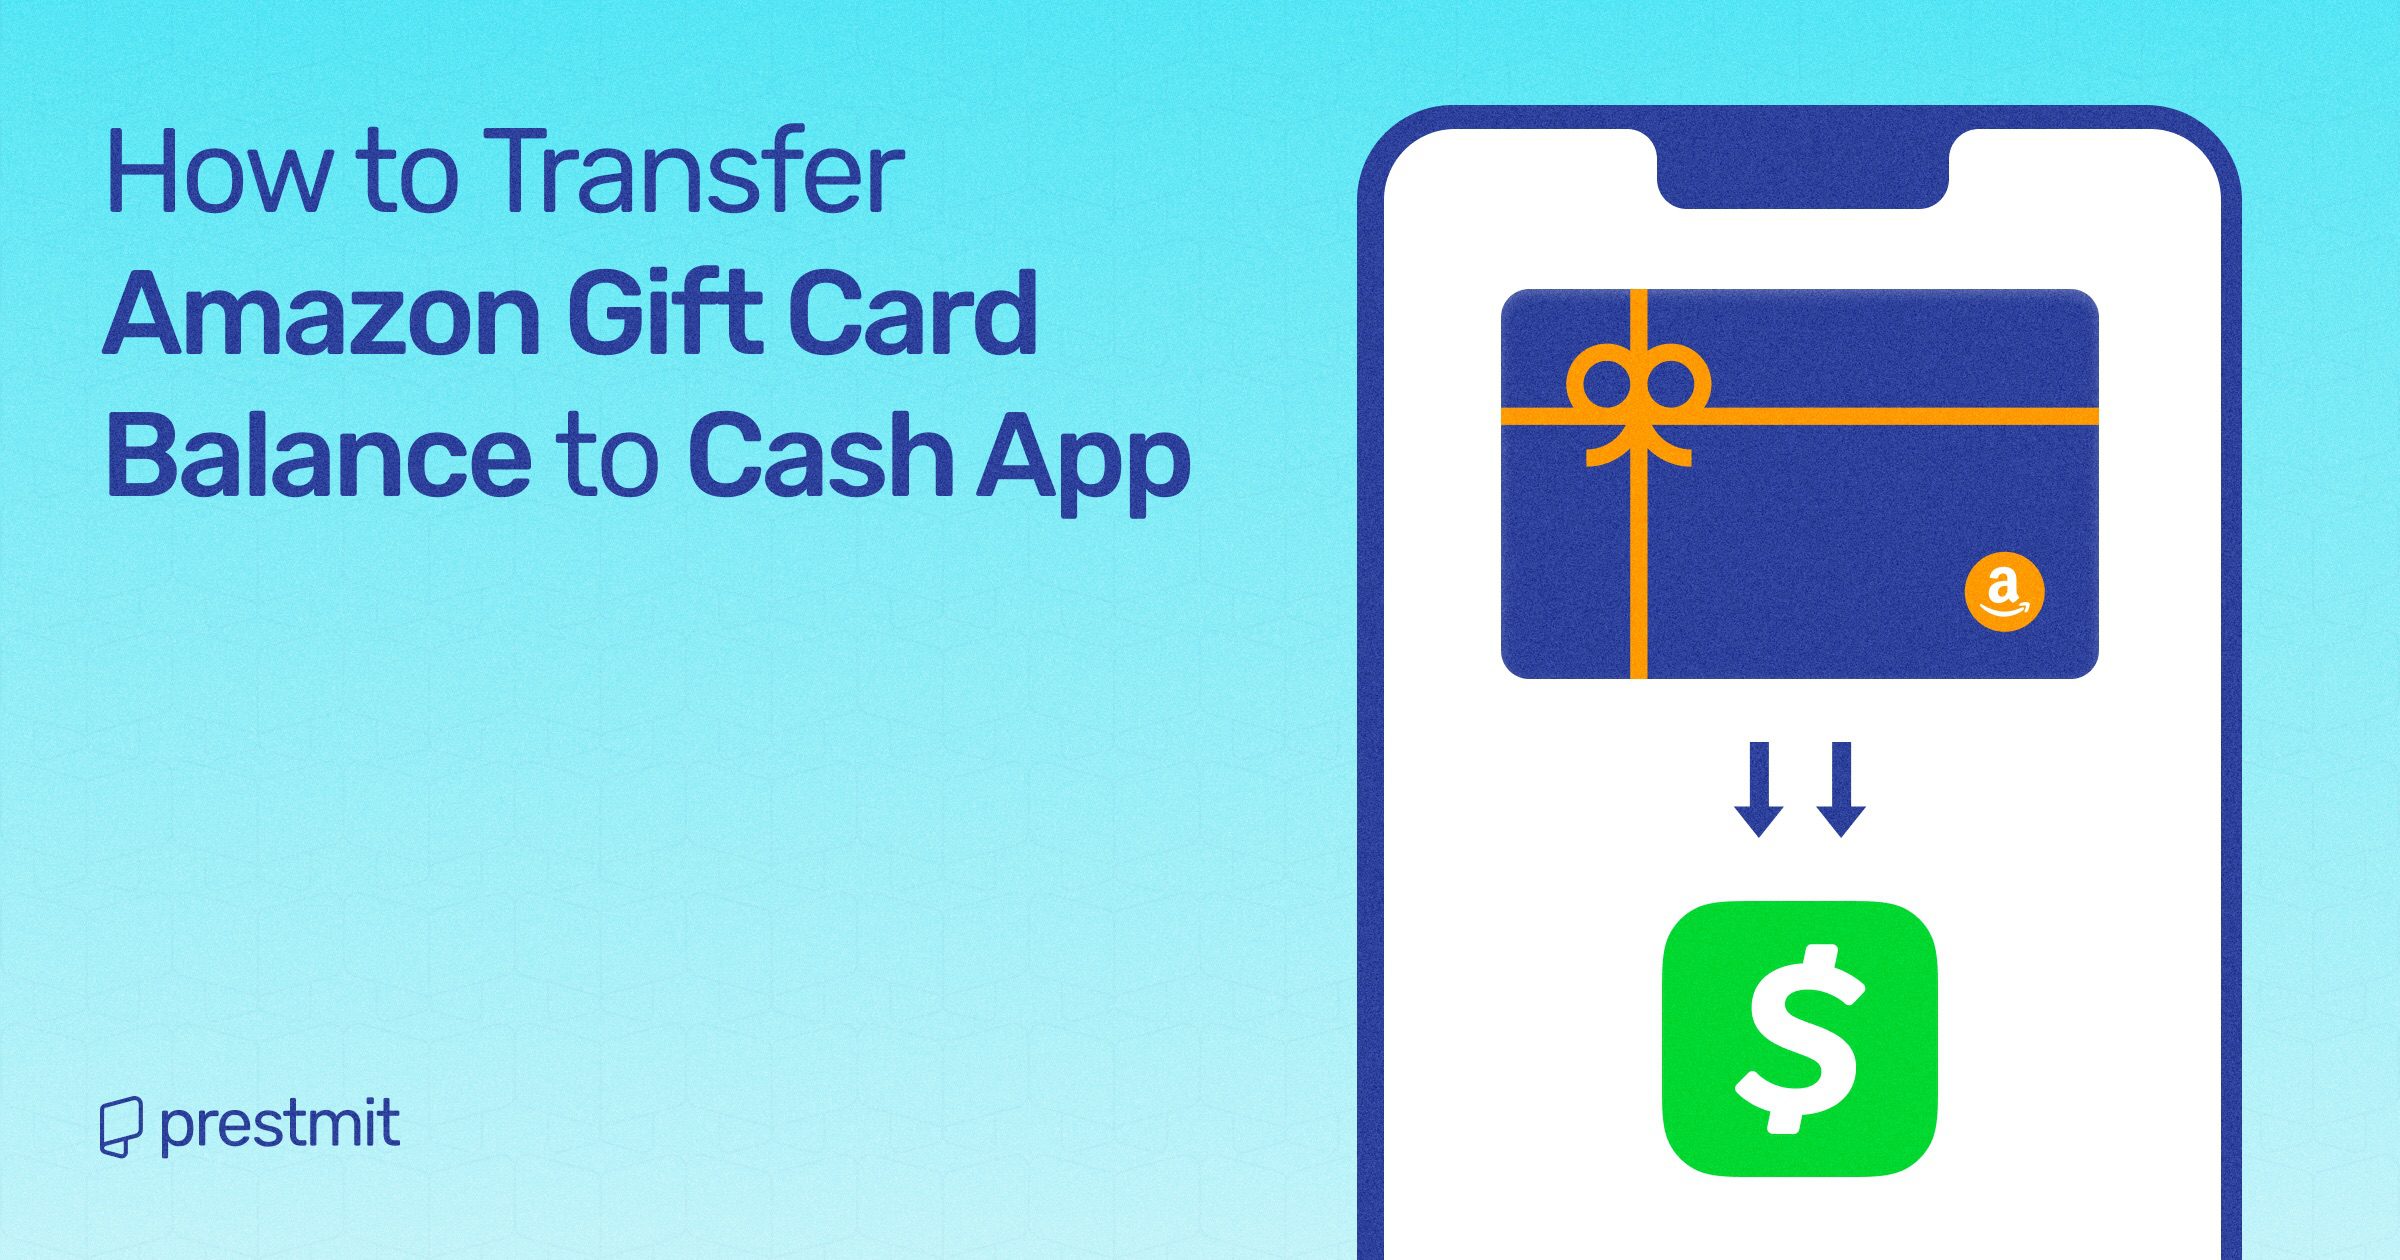 How To Transfer Walmart Gift Card Balance To Another Card